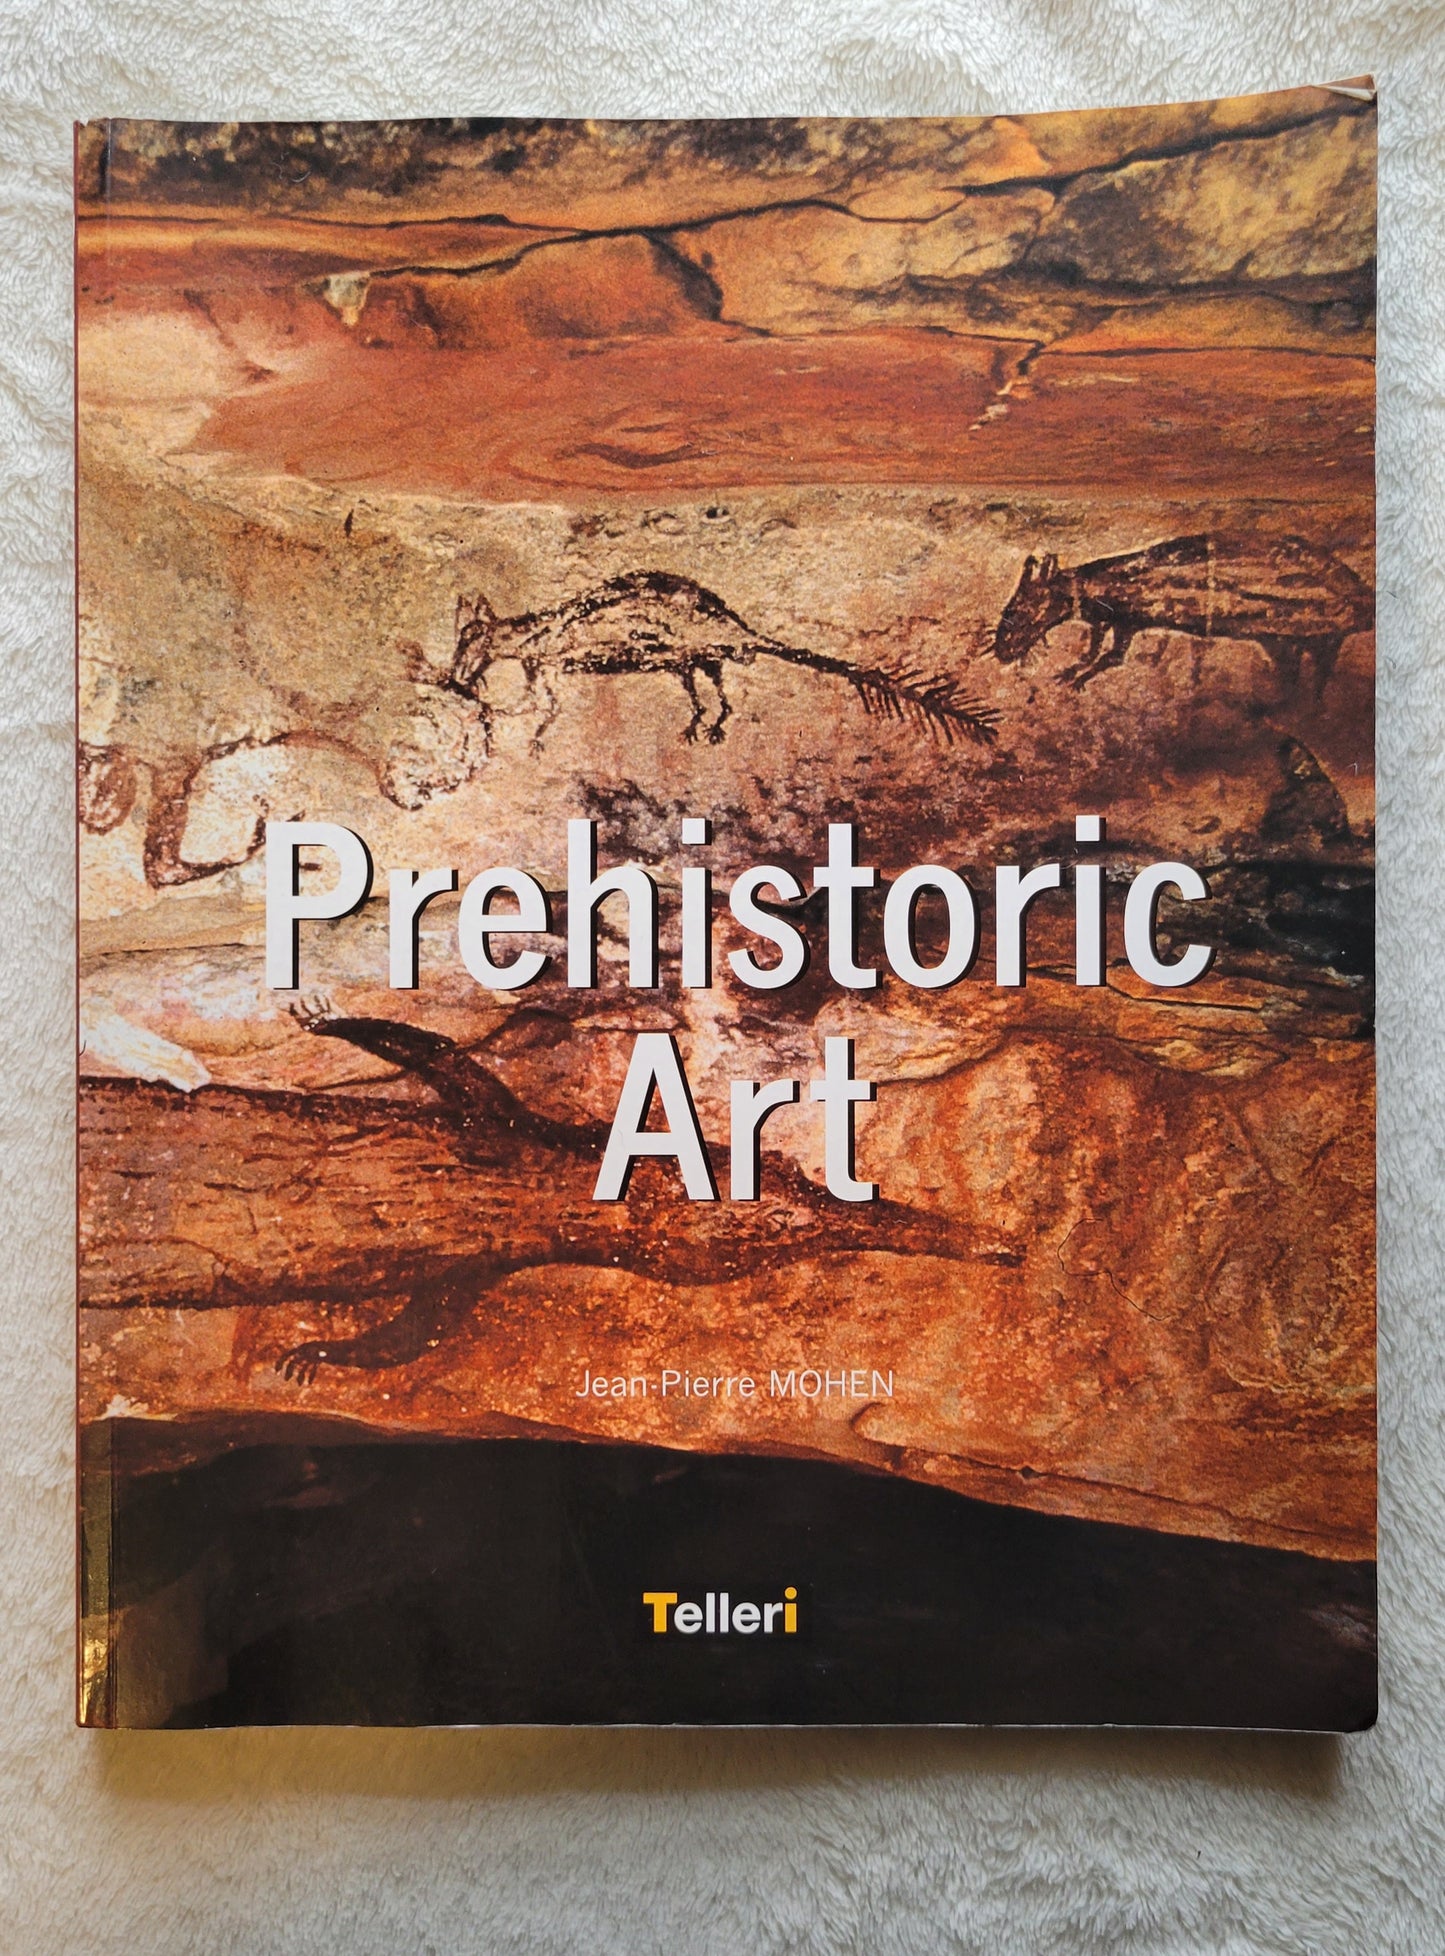 Used book for sale, "Prehistoric Art" was written by Dr. Jean-Pierre Mohen, published by Finest S.A. / Editions. View of front cover.